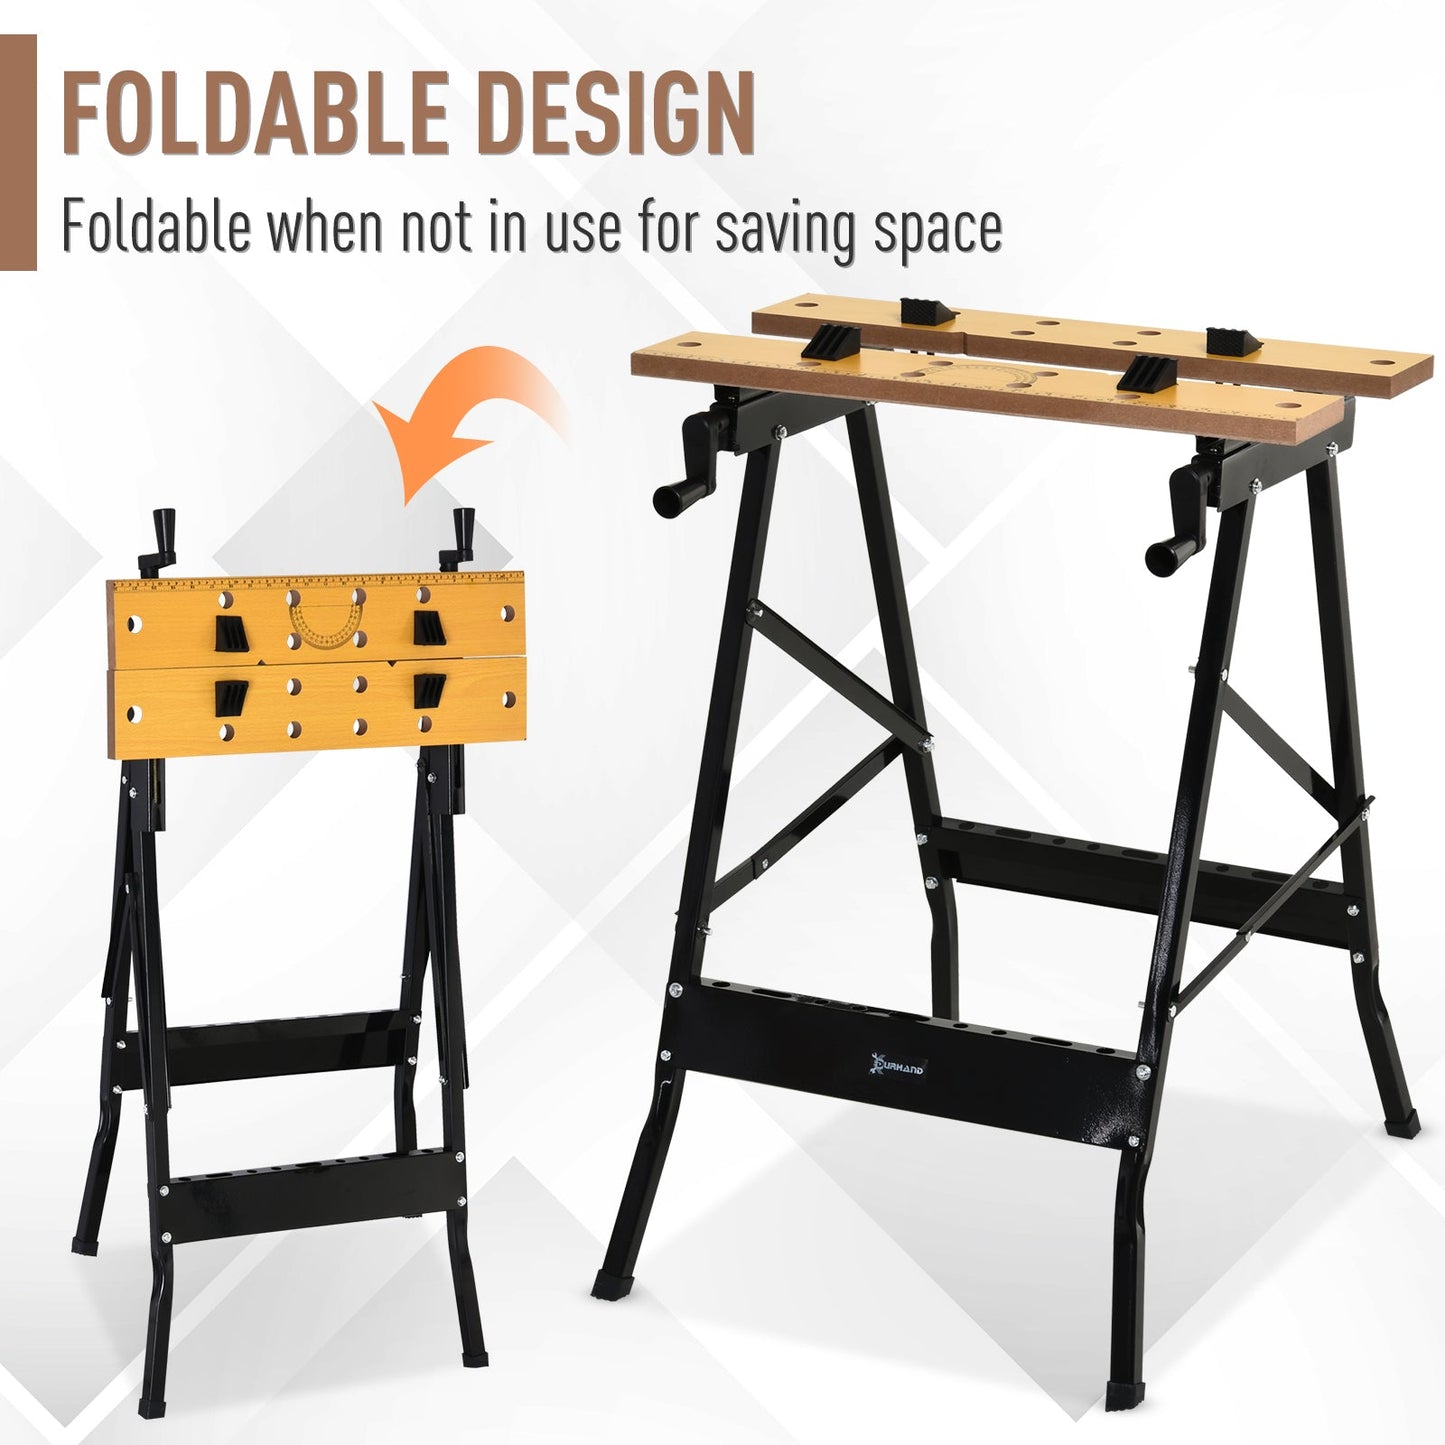 Foldable Work Bench w/ Adjustable Clamps, Carpenter Saw Table, MDF Surface, Steel Frame, 100kg/220lbs Capacity at Gallery Canada